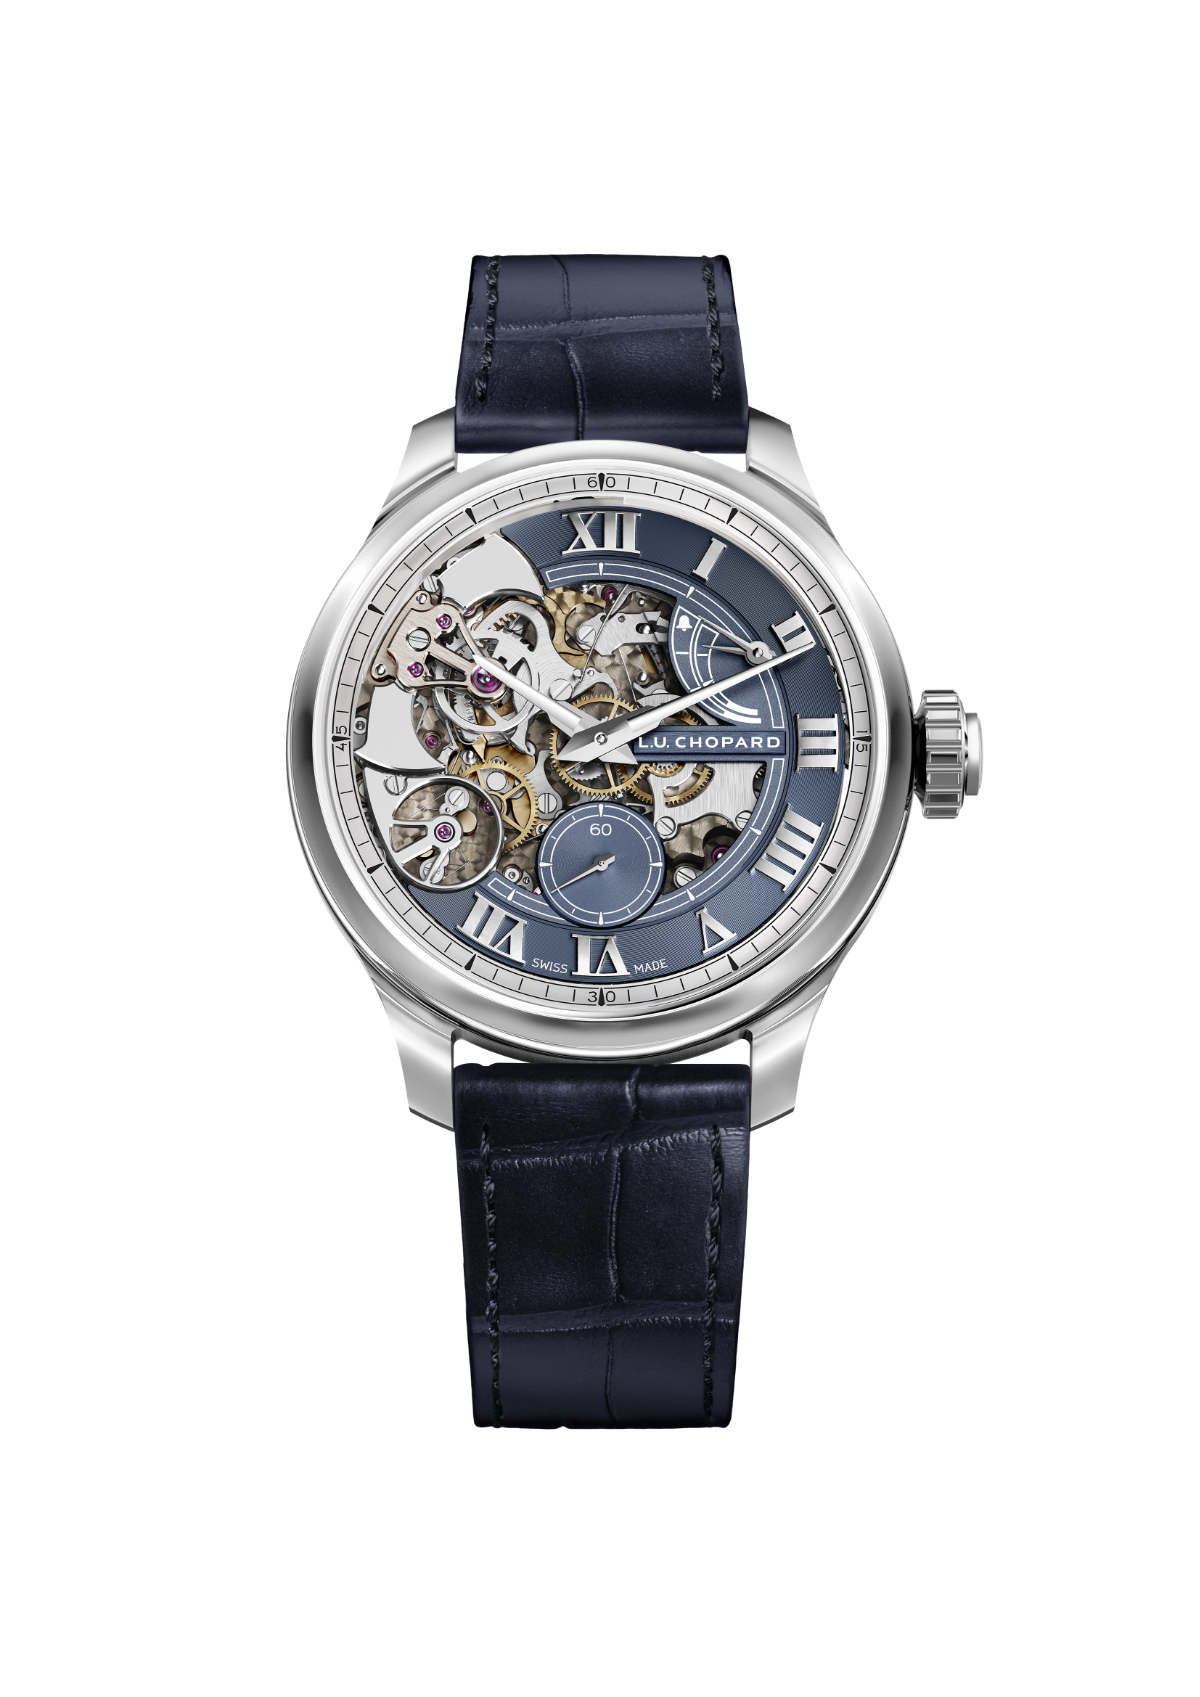 L.U.C Full Strike: A New Platinum Limited Edition For The Crystal-clear Minute Repeater By Chopard